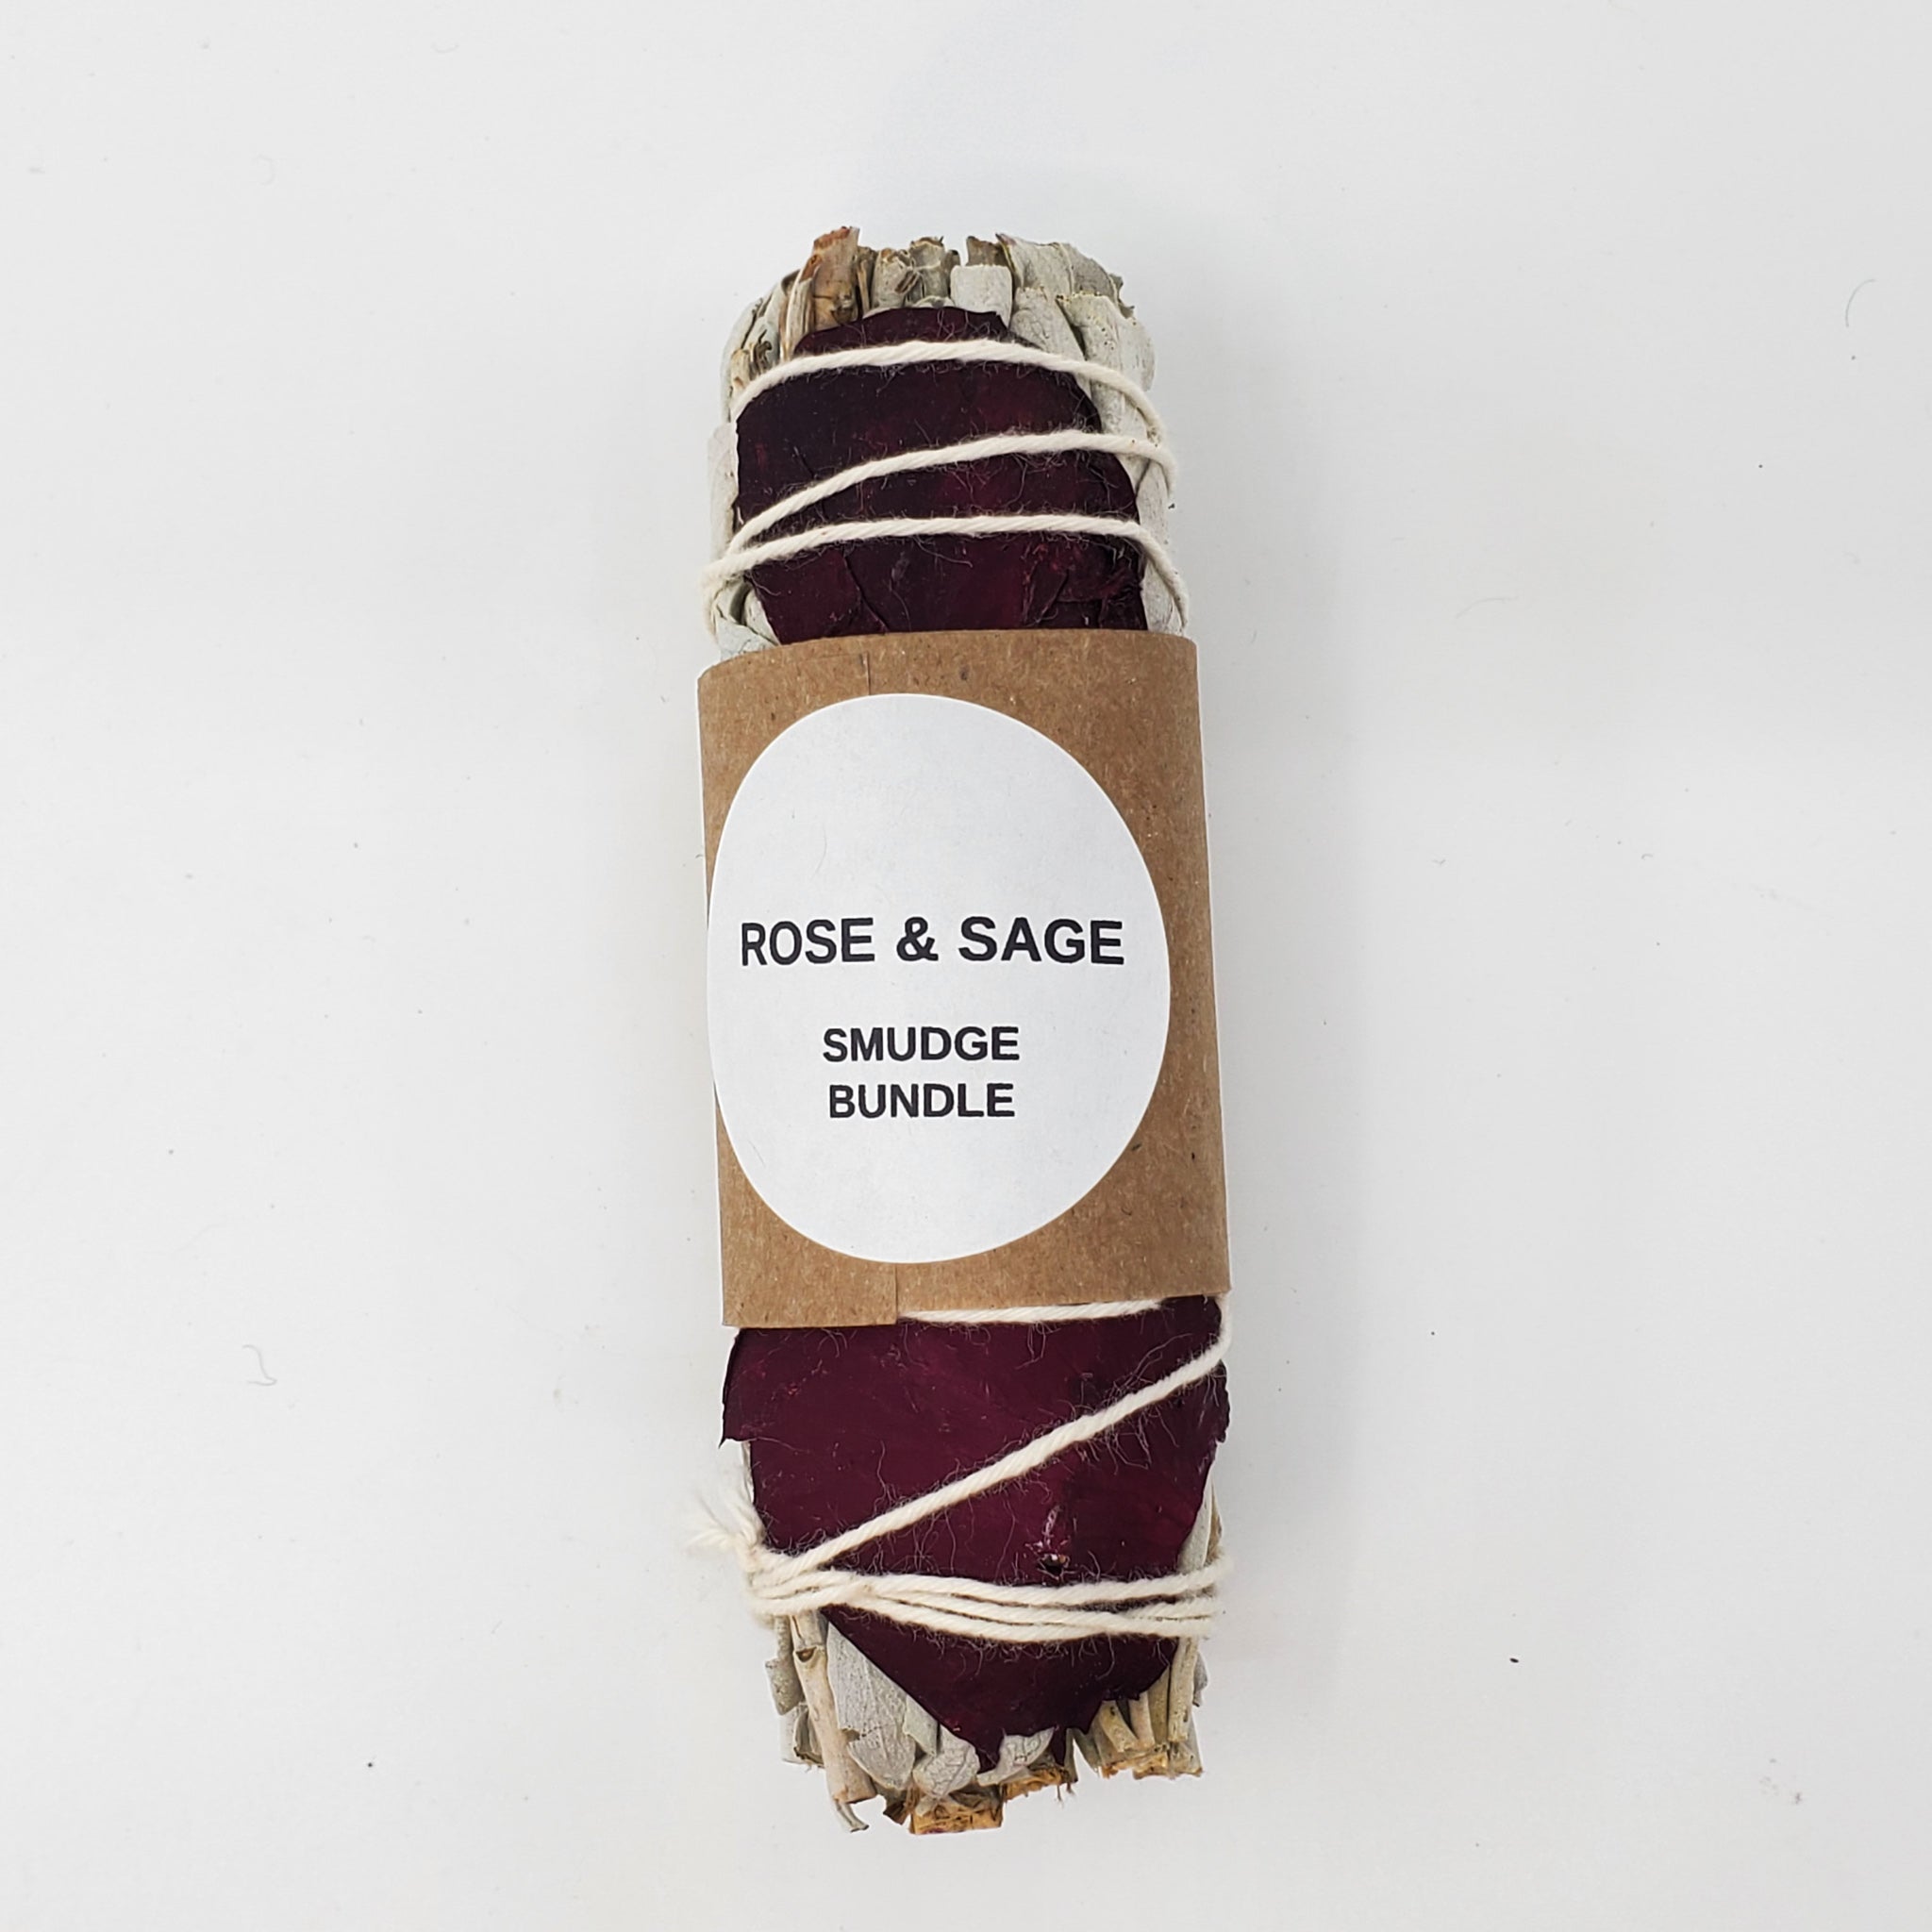 Rose & Sage Smudge Stick - The Mockingbird Apothecary & General Store